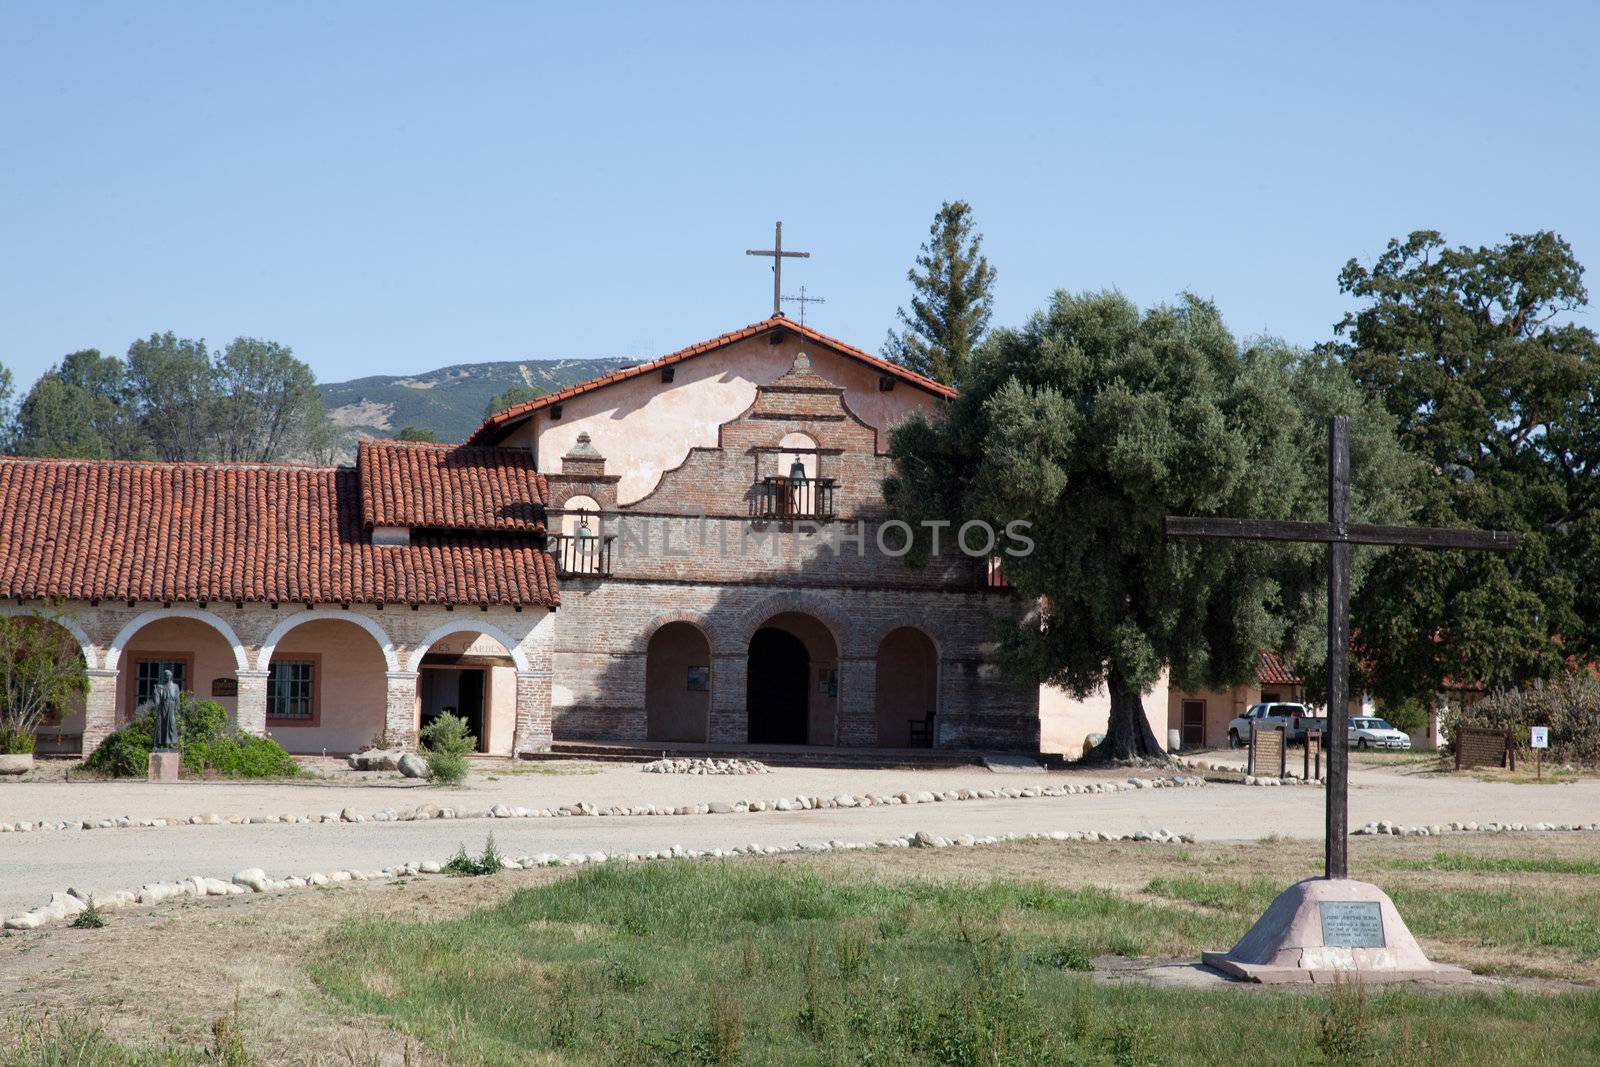 Mission San Antonio de Padua was founded on July 14, 1771, the third mission founded in Alta California